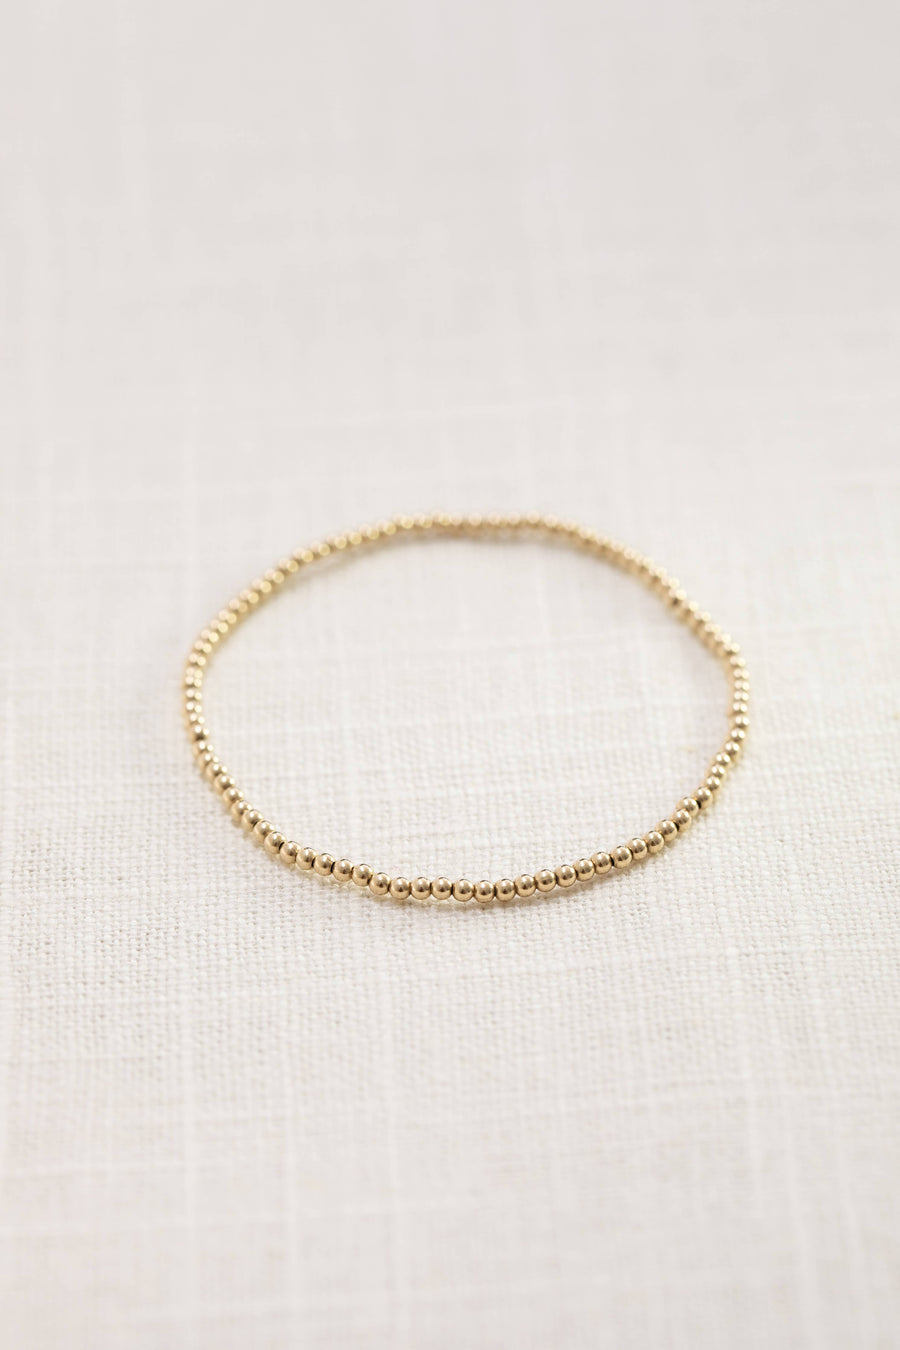 Coast and Cove - 3mm Gold Ball Bracelet